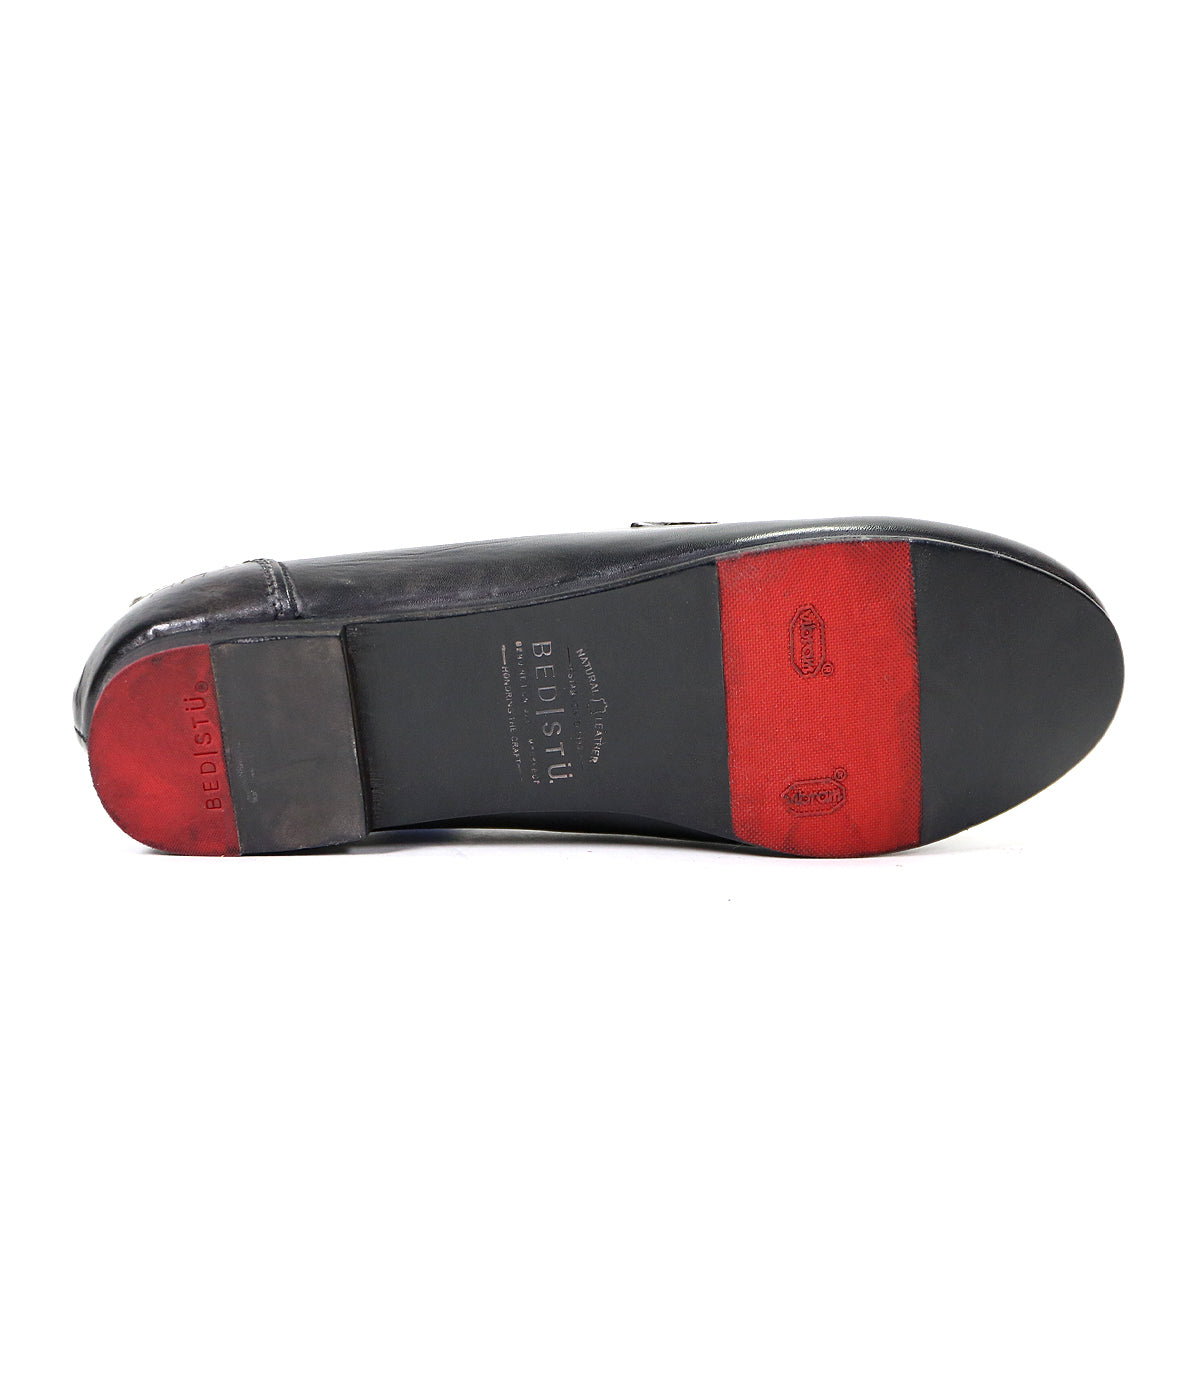 Ballet shoe sole with two-tone leather, displaying visible Bed Stu markings and a slightly textured surface.